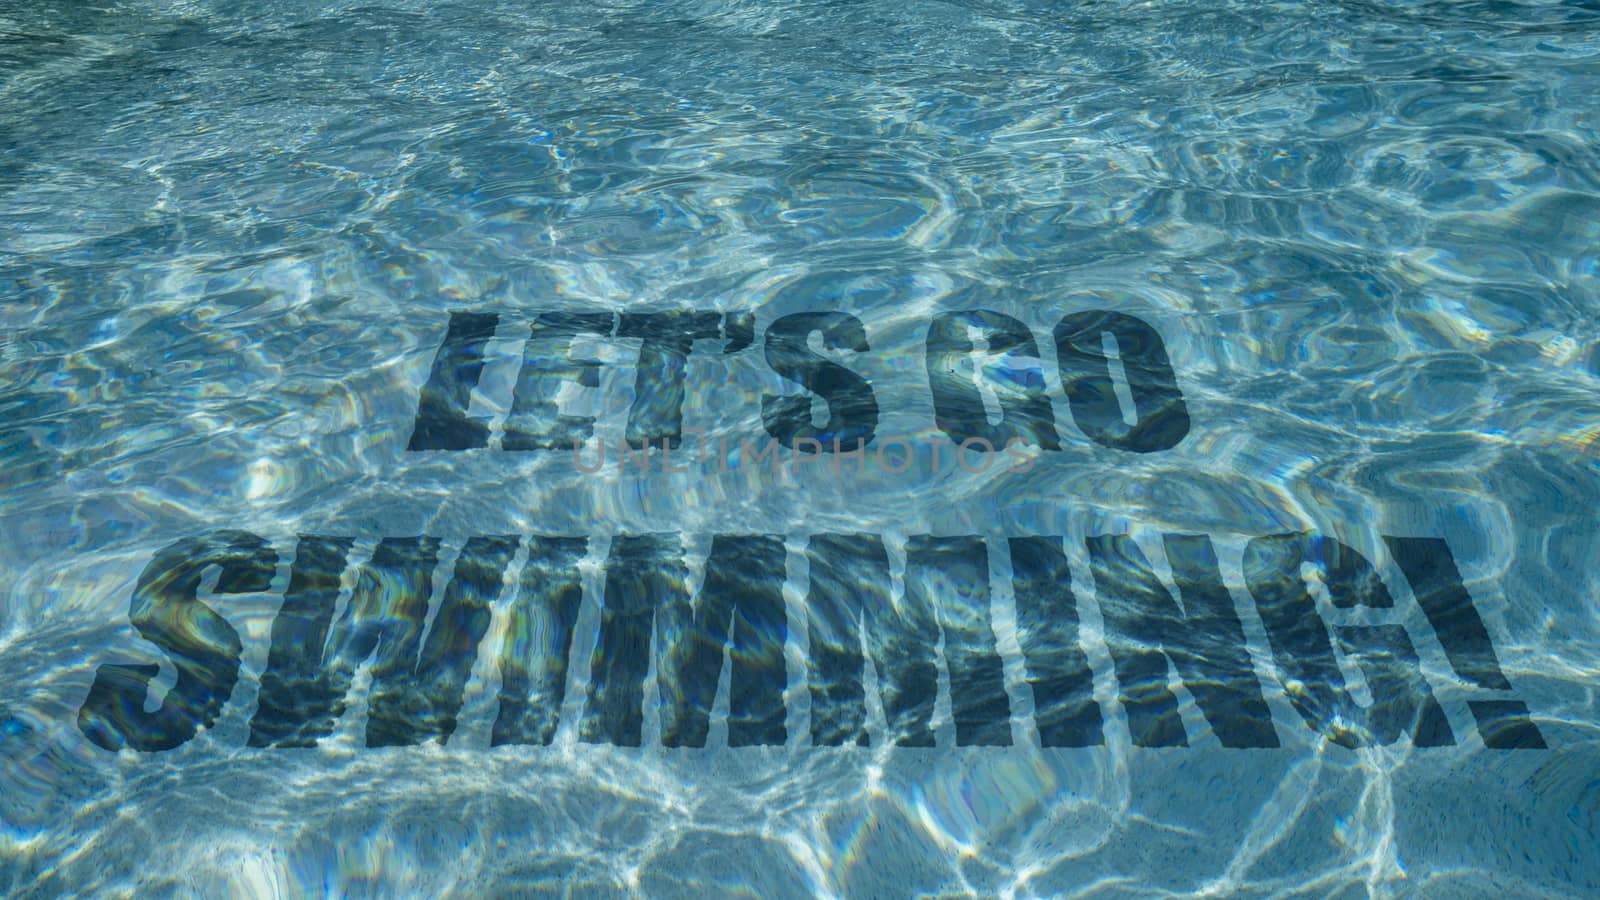 Let's go swimming text appearing under water in a swimming pool by reel_hawks_studio